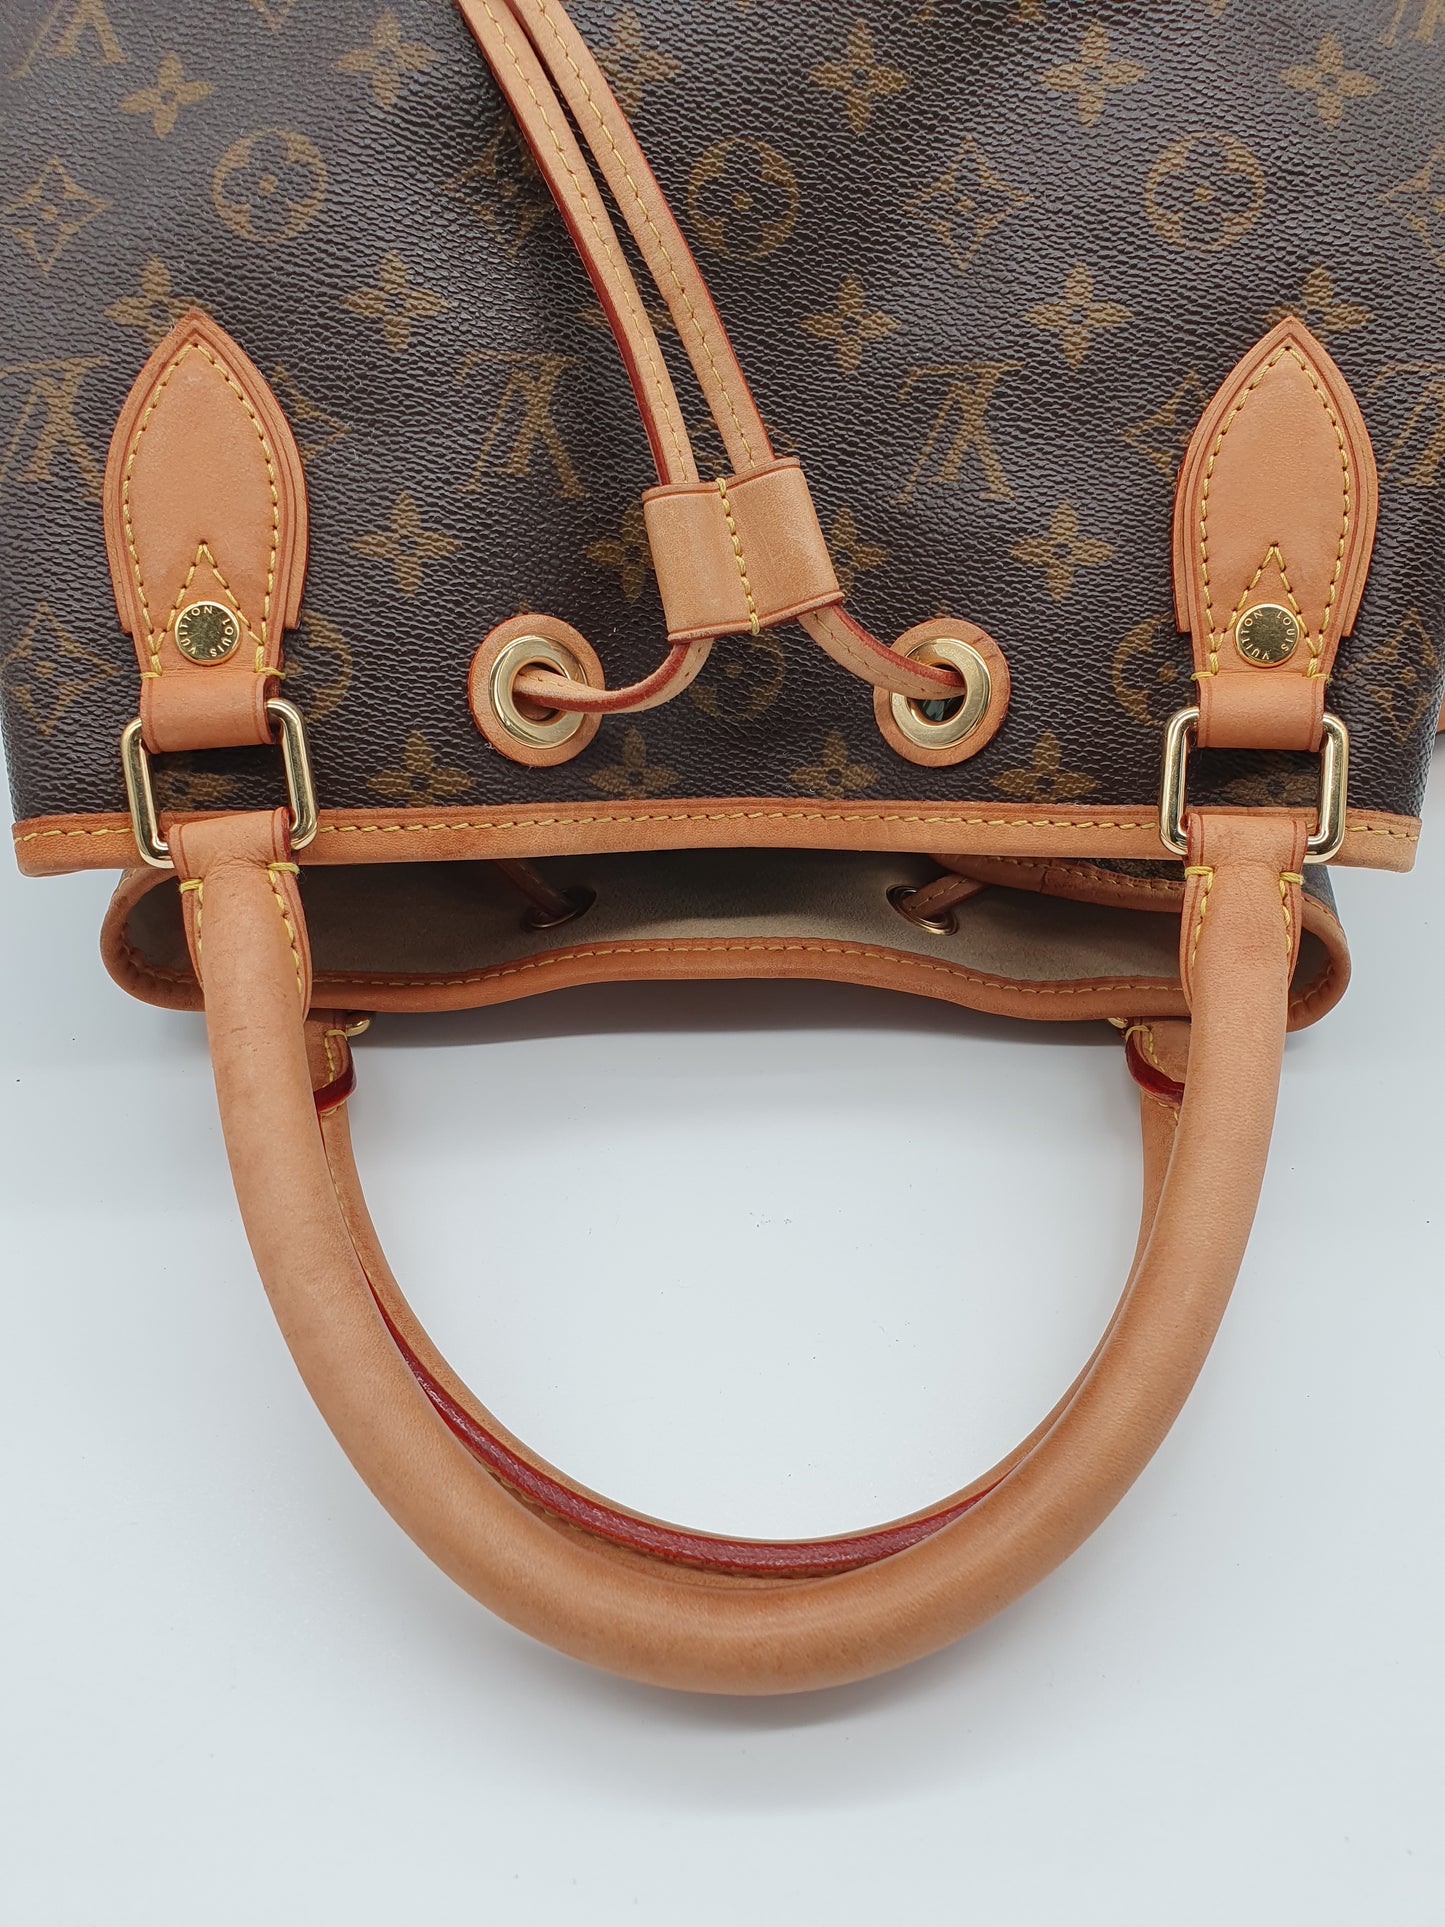 Louis vuitton neo 2 way limited edition bag